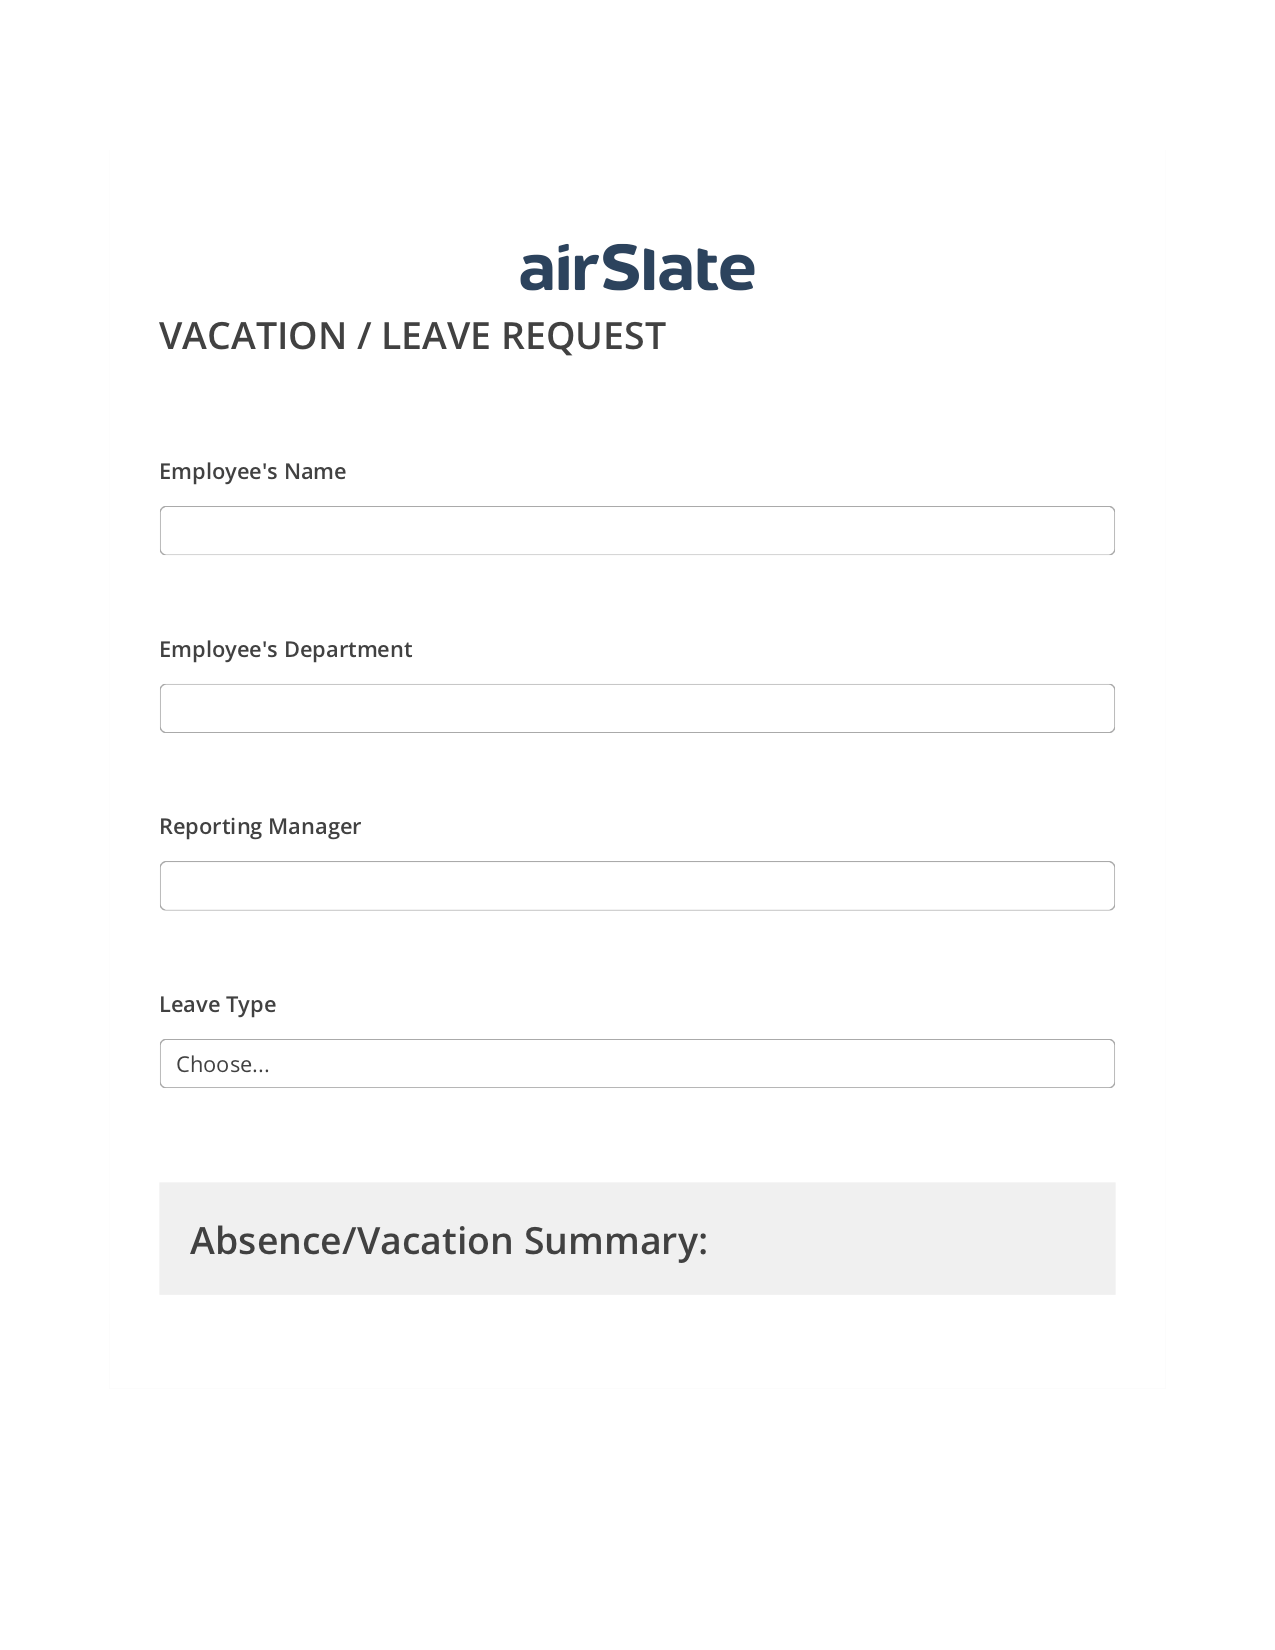 Vacation/Leave Request Workflow Pre-fill from Google Sheets Bot, Create slate addon, Export to Smartsheet